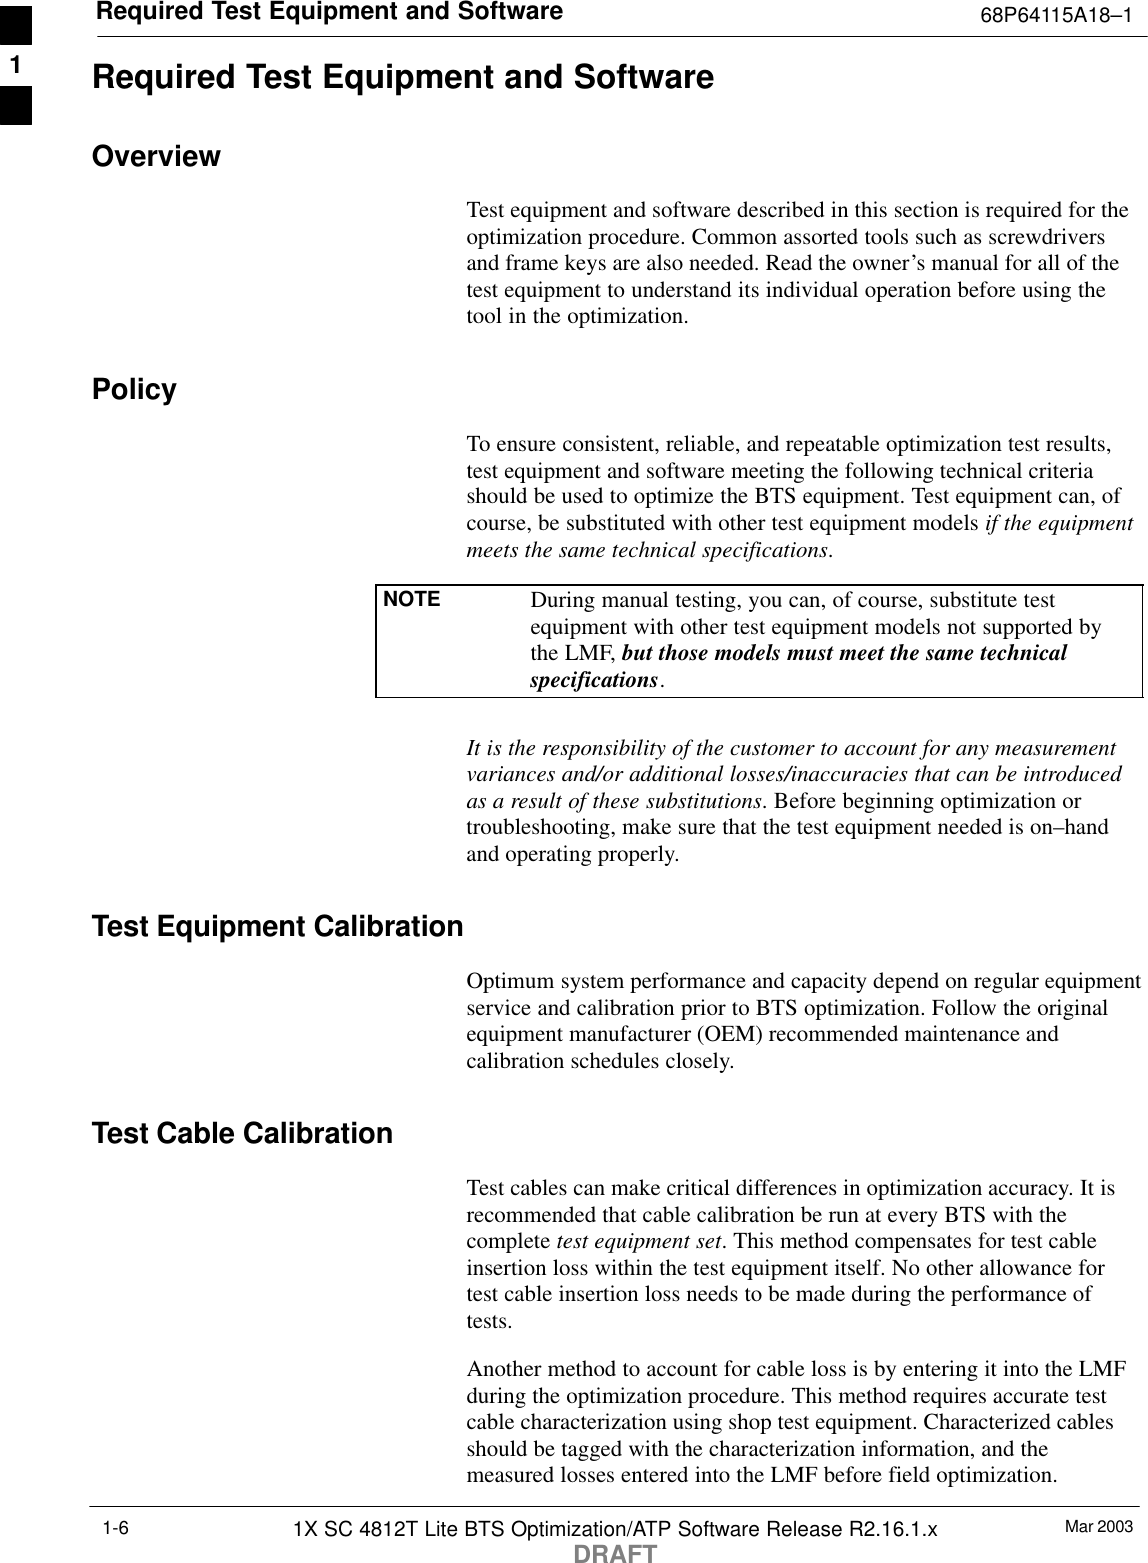 Required Test Equipment and Software 68P64115A18–1Mar 20031X SC 4812T Lite BTS Optimization/ATP Software Release R2.16.1.xDRAFT1-6Required Test Equipment and SoftwareOverviewTest equipment and software described in this section is required for theoptimization procedure. Common assorted tools such as screwdriversand frame keys are also needed. Read the owner’s manual for all of thetest equipment to understand its individual operation before using thetool in the optimization.PolicyTo ensure consistent, reliable, and repeatable optimization test results,test equipment and software meeting the following technical criteriashould be used to optimize the BTS equipment. Test equipment can, ofcourse, be substituted with other test equipment models if the equipmentmeets the same technical specifications.NOTE During manual testing, you can, of course, substitute testequipment with other test equipment models not supported bythe LMF, but those models must meet the same technicalspecifications.It is the responsibility of the customer to account for any measurementvariances and/or additional losses/inaccuracies that can be introducedas a result of these substitutions. Before beginning optimization ortroubleshooting, make sure that the test equipment needed is on–handand operating properly.Test Equipment CalibrationOptimum system performance and capacity depend on regular equipmentservice and calibration prior to BTS optimization. Follow the originalequipment manufacturer (OEM) recommended maintenance andcalibration schedules closely.Test Cable CalibrationTest cables can make critical differences in optimization accuracy. It isrecommended that cable calibration be run at every BTS with thecomplete test equipment set. This method compensates for test cableinsertion loss within the test equipment itself. No other allowance fortest cable insertion loss needs to be made during the performance oftests.Another method to account for cable loss is by entering it into the LMFduring the optimization procedure. This method requires accurate testcable characterization using shop test equipment. Characterized cablesshould be tagged with the characterization information, and themeasured losses entered into the LMF before field optimization.1